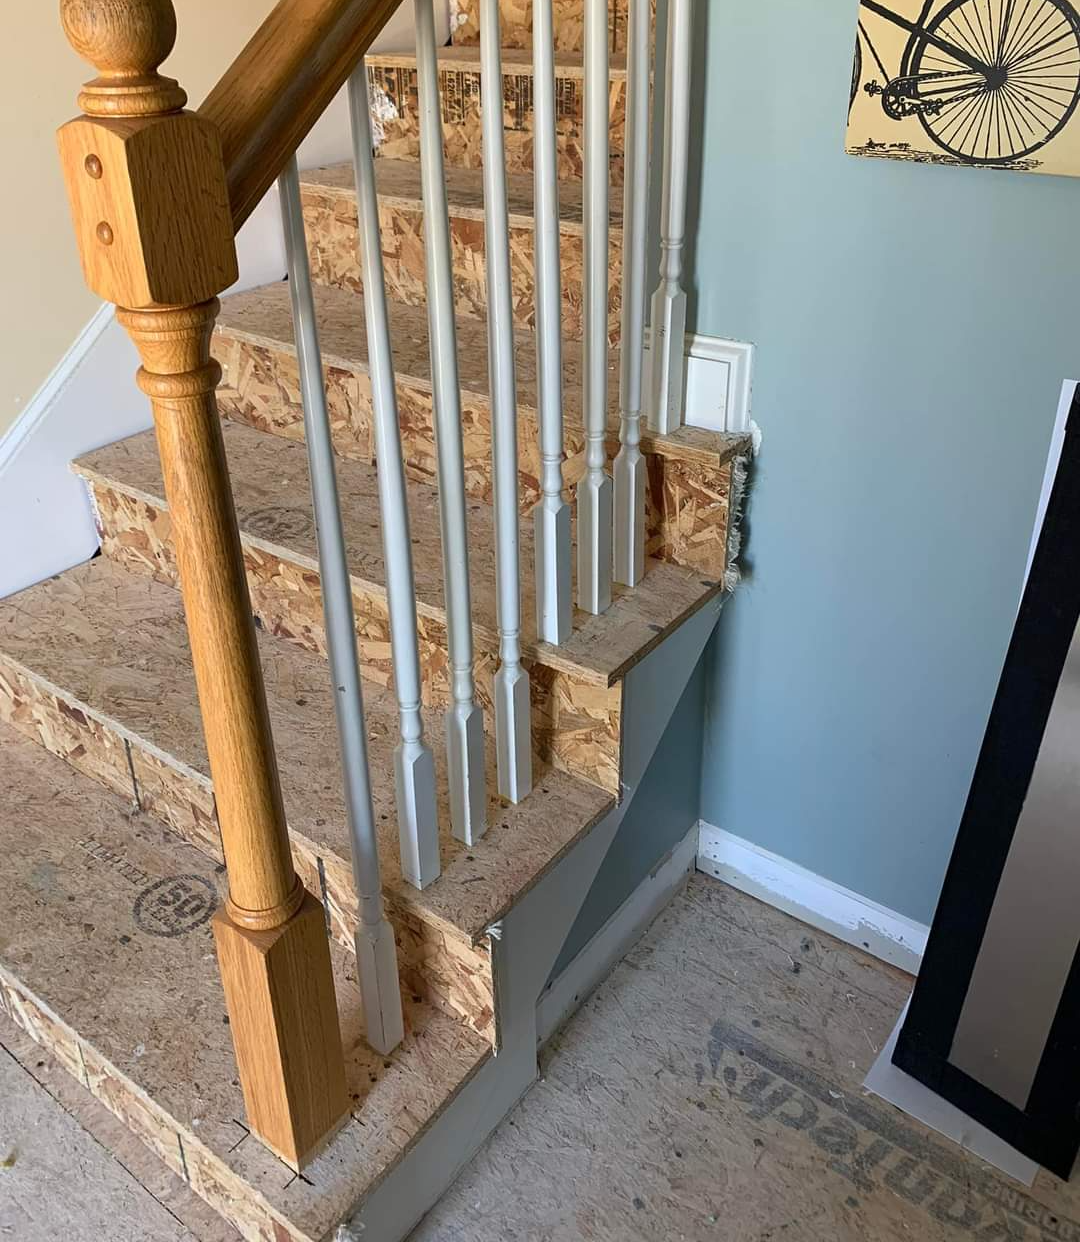 This is a set of stairs, how did this end up in a garage epoxy page?